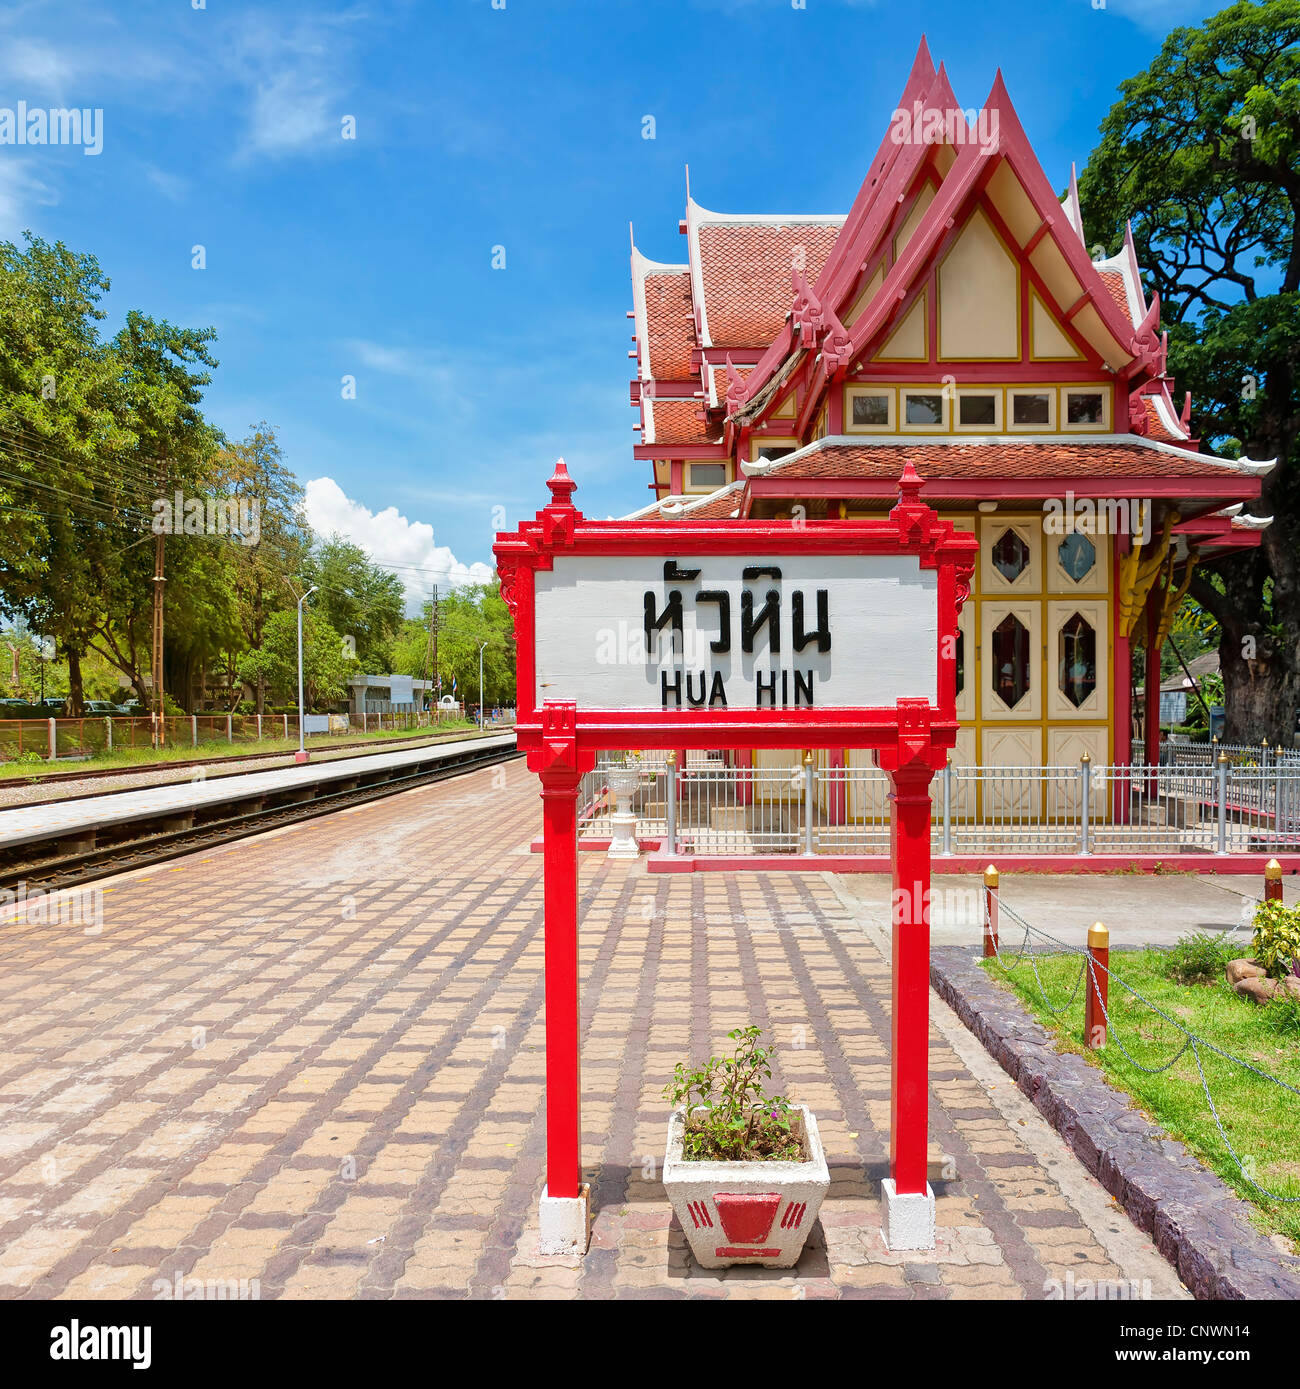 An image of the Hua Hin train station in Thailand. Stock Photo